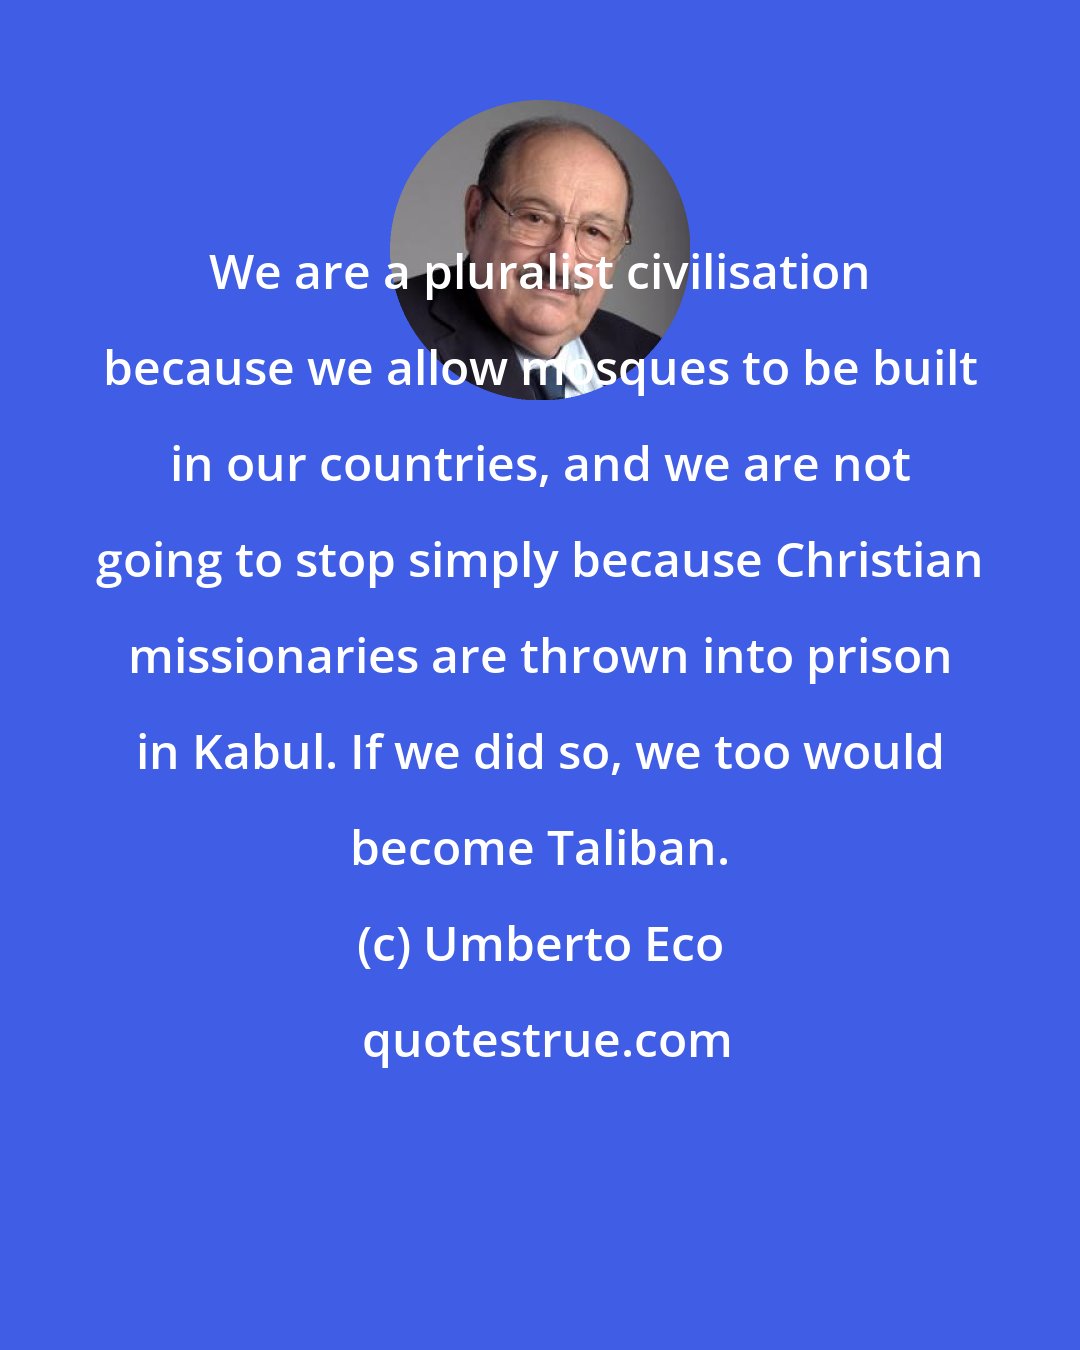 Umberto Eco: We are a pluralist civilisation because we allow mosques to be built in our countries, and we are not going to stop simply because Christian missionaries are thrown into prison in Kabul. If we did so, we too would become Taliban.